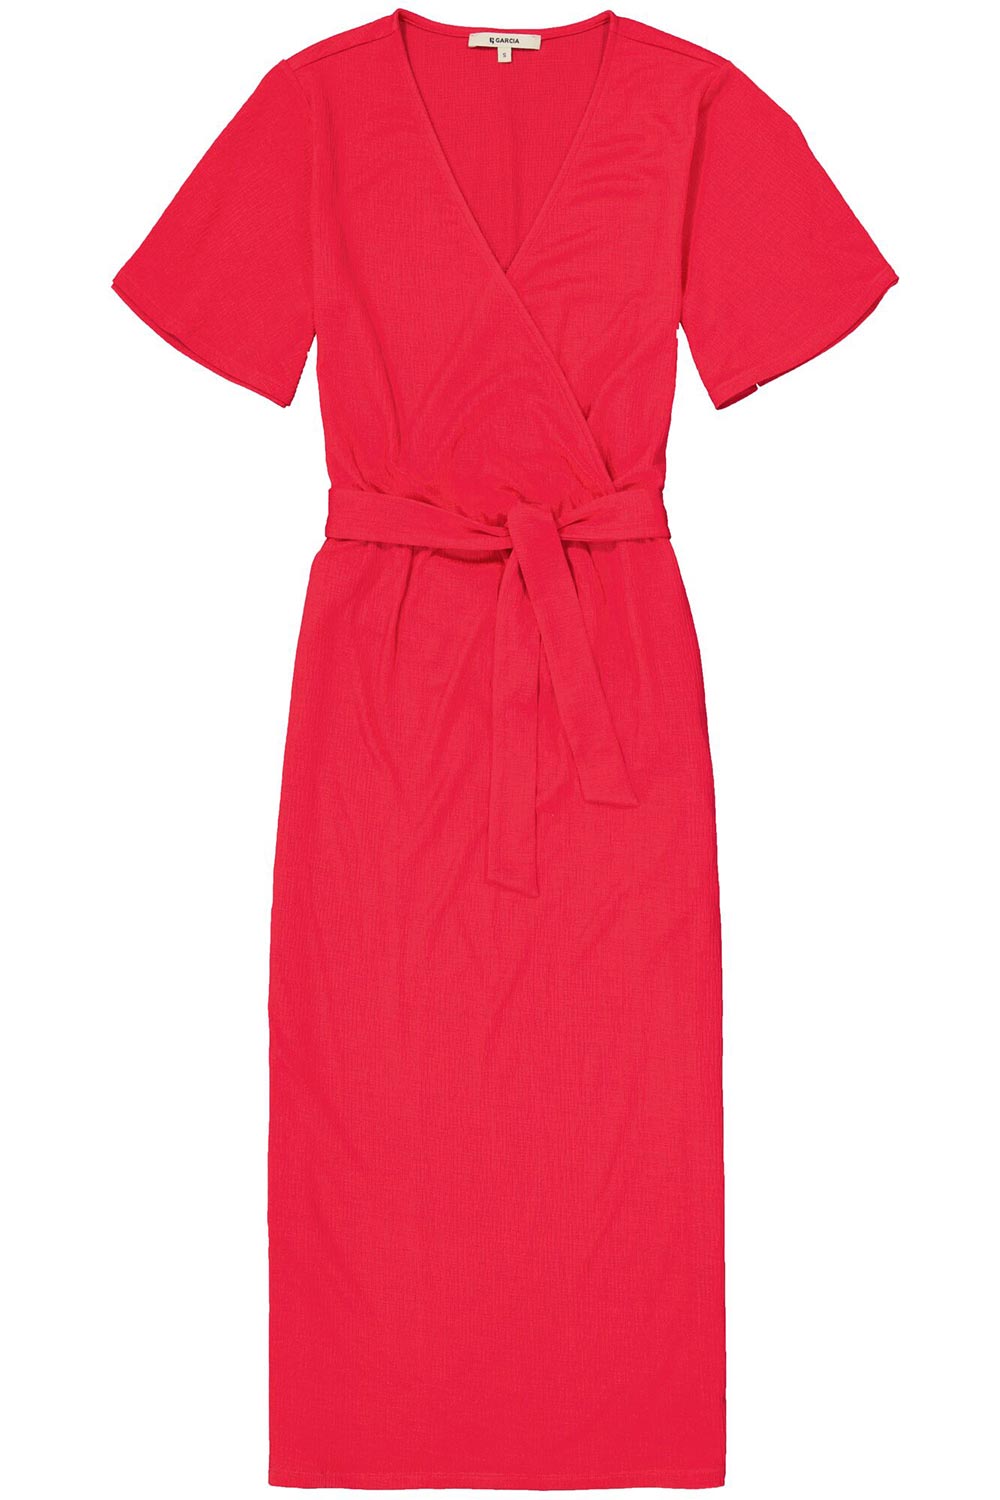 Garcia (O40081) Women's Short Bell Sleeve Faux Wrap Dress In a Vibrant Pink & Textured Fabric